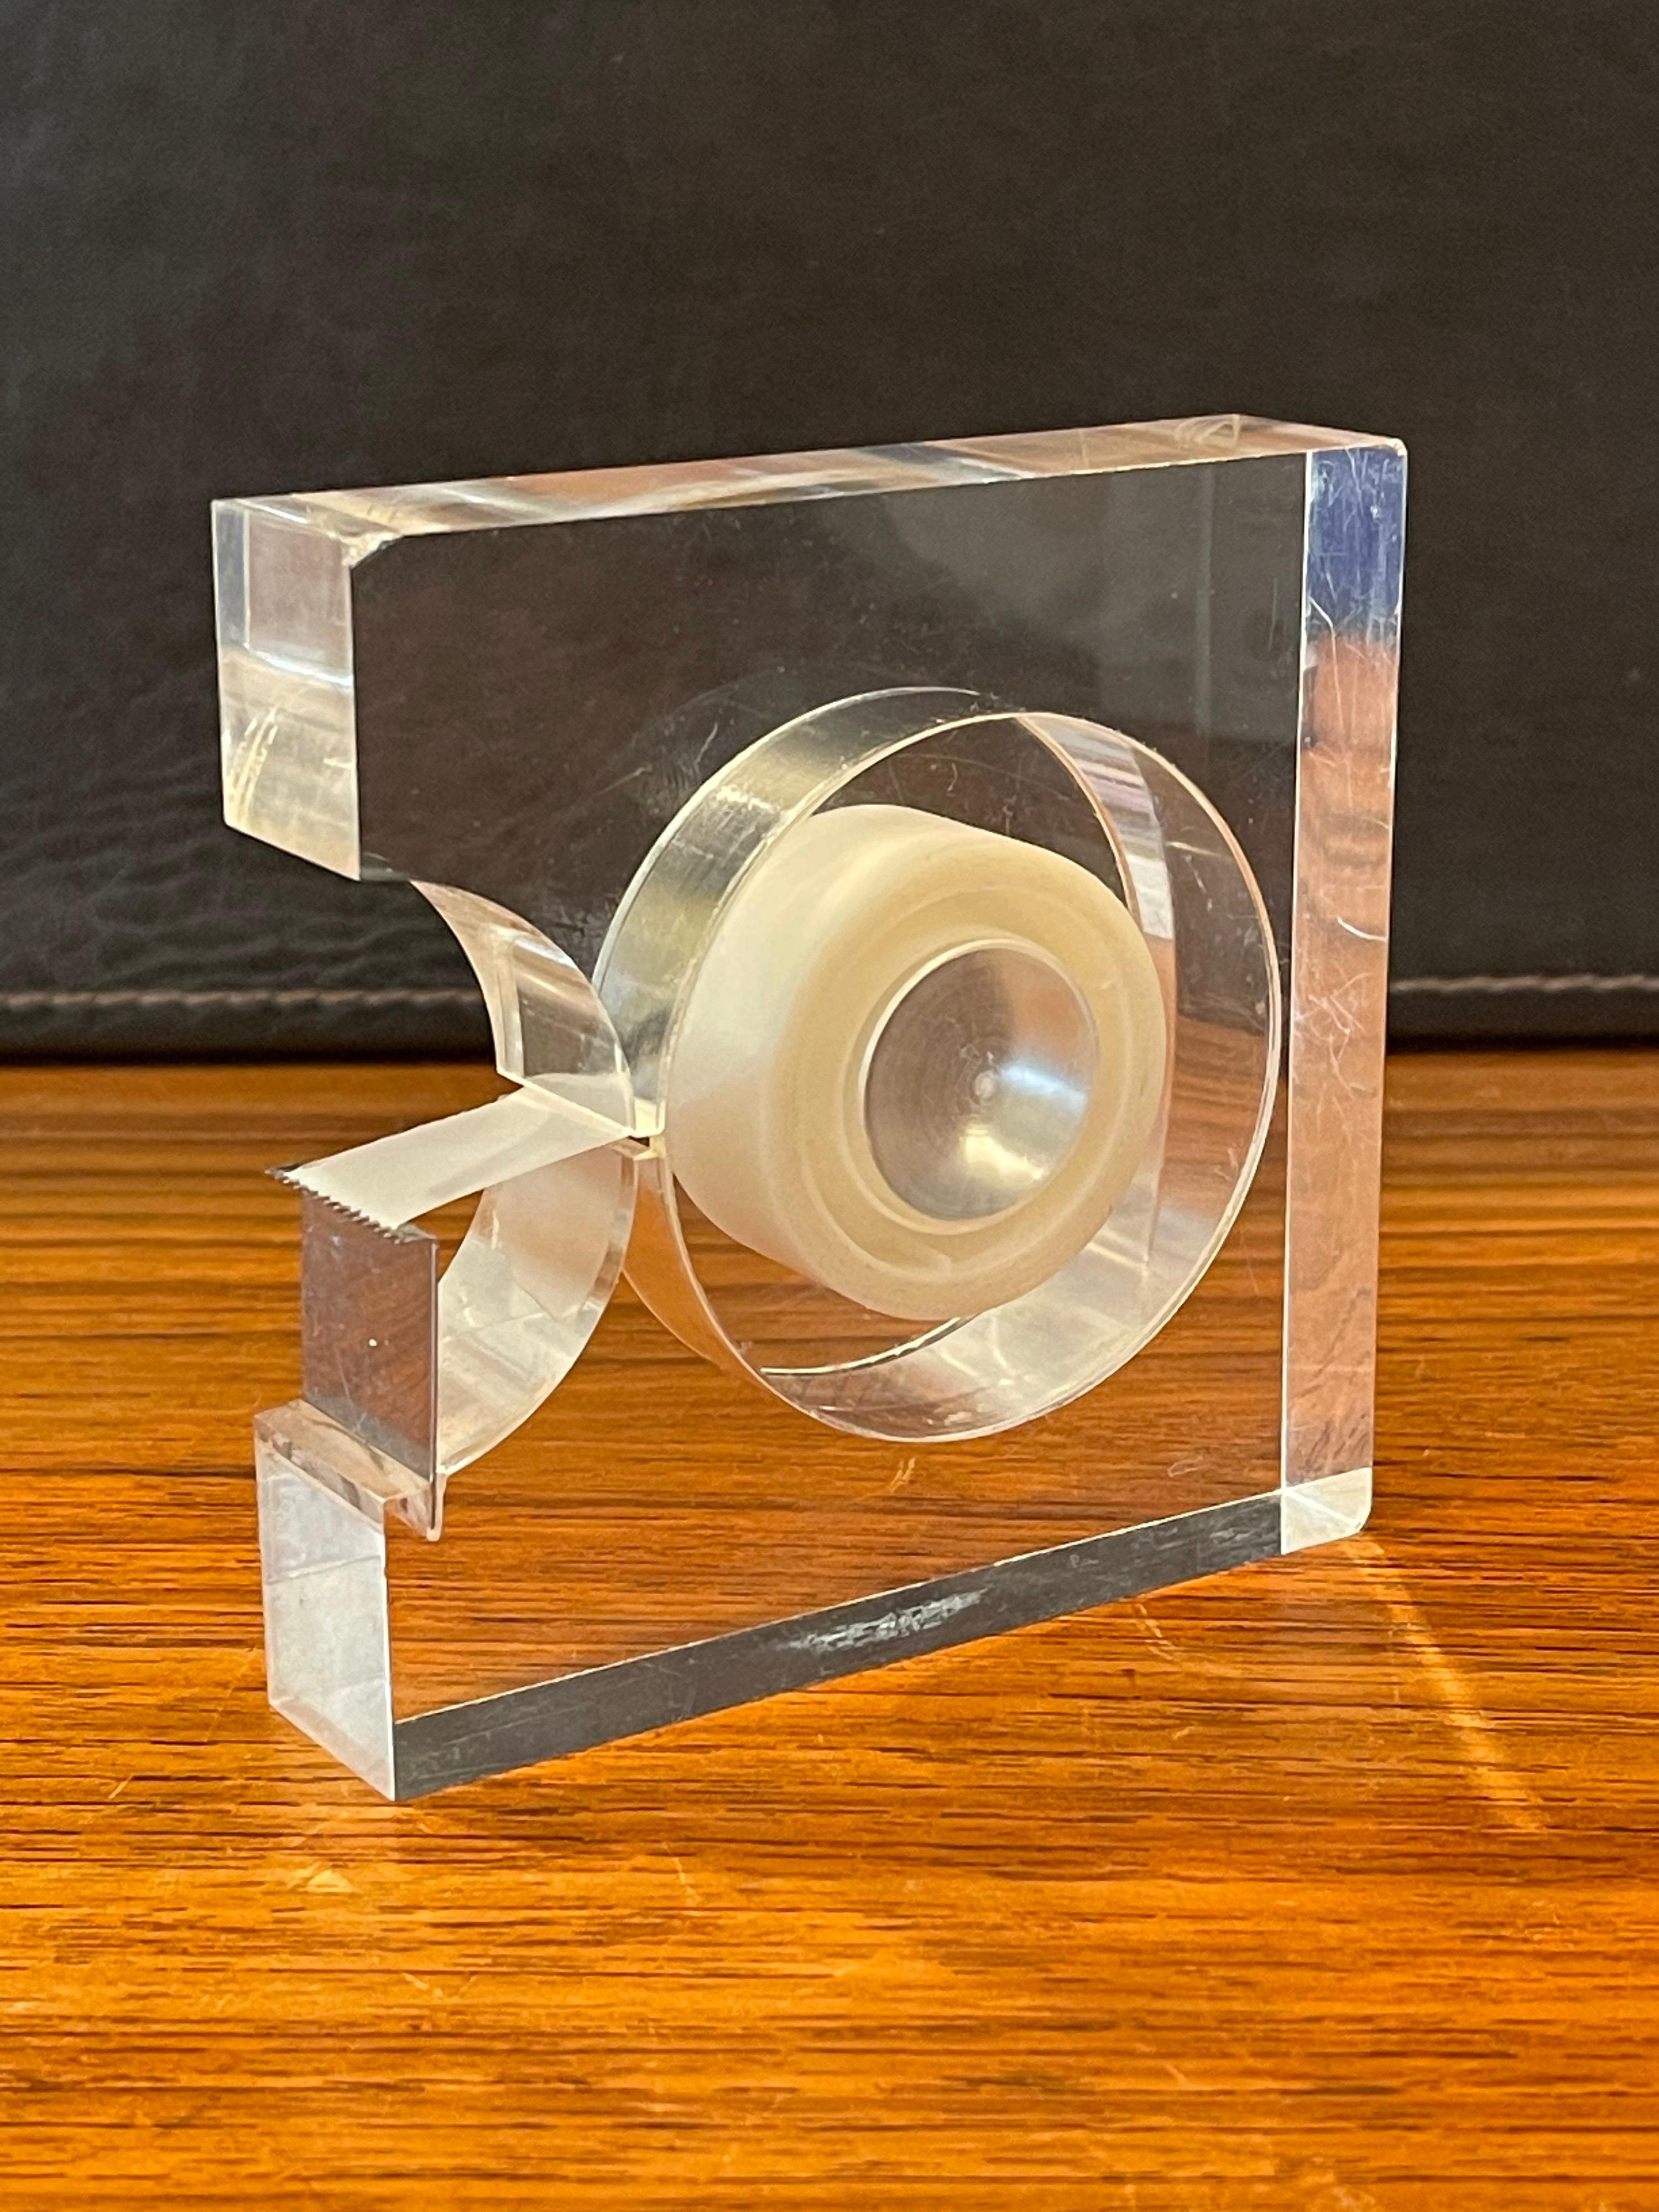 Very functional modern lucite tape dispenser by Two's Company of New York for the Design Study Collection of the Museum of Modern Art (MoMA), circa 1970s. The piece is in very good condition (no crazing or discoloration) with the exception of two